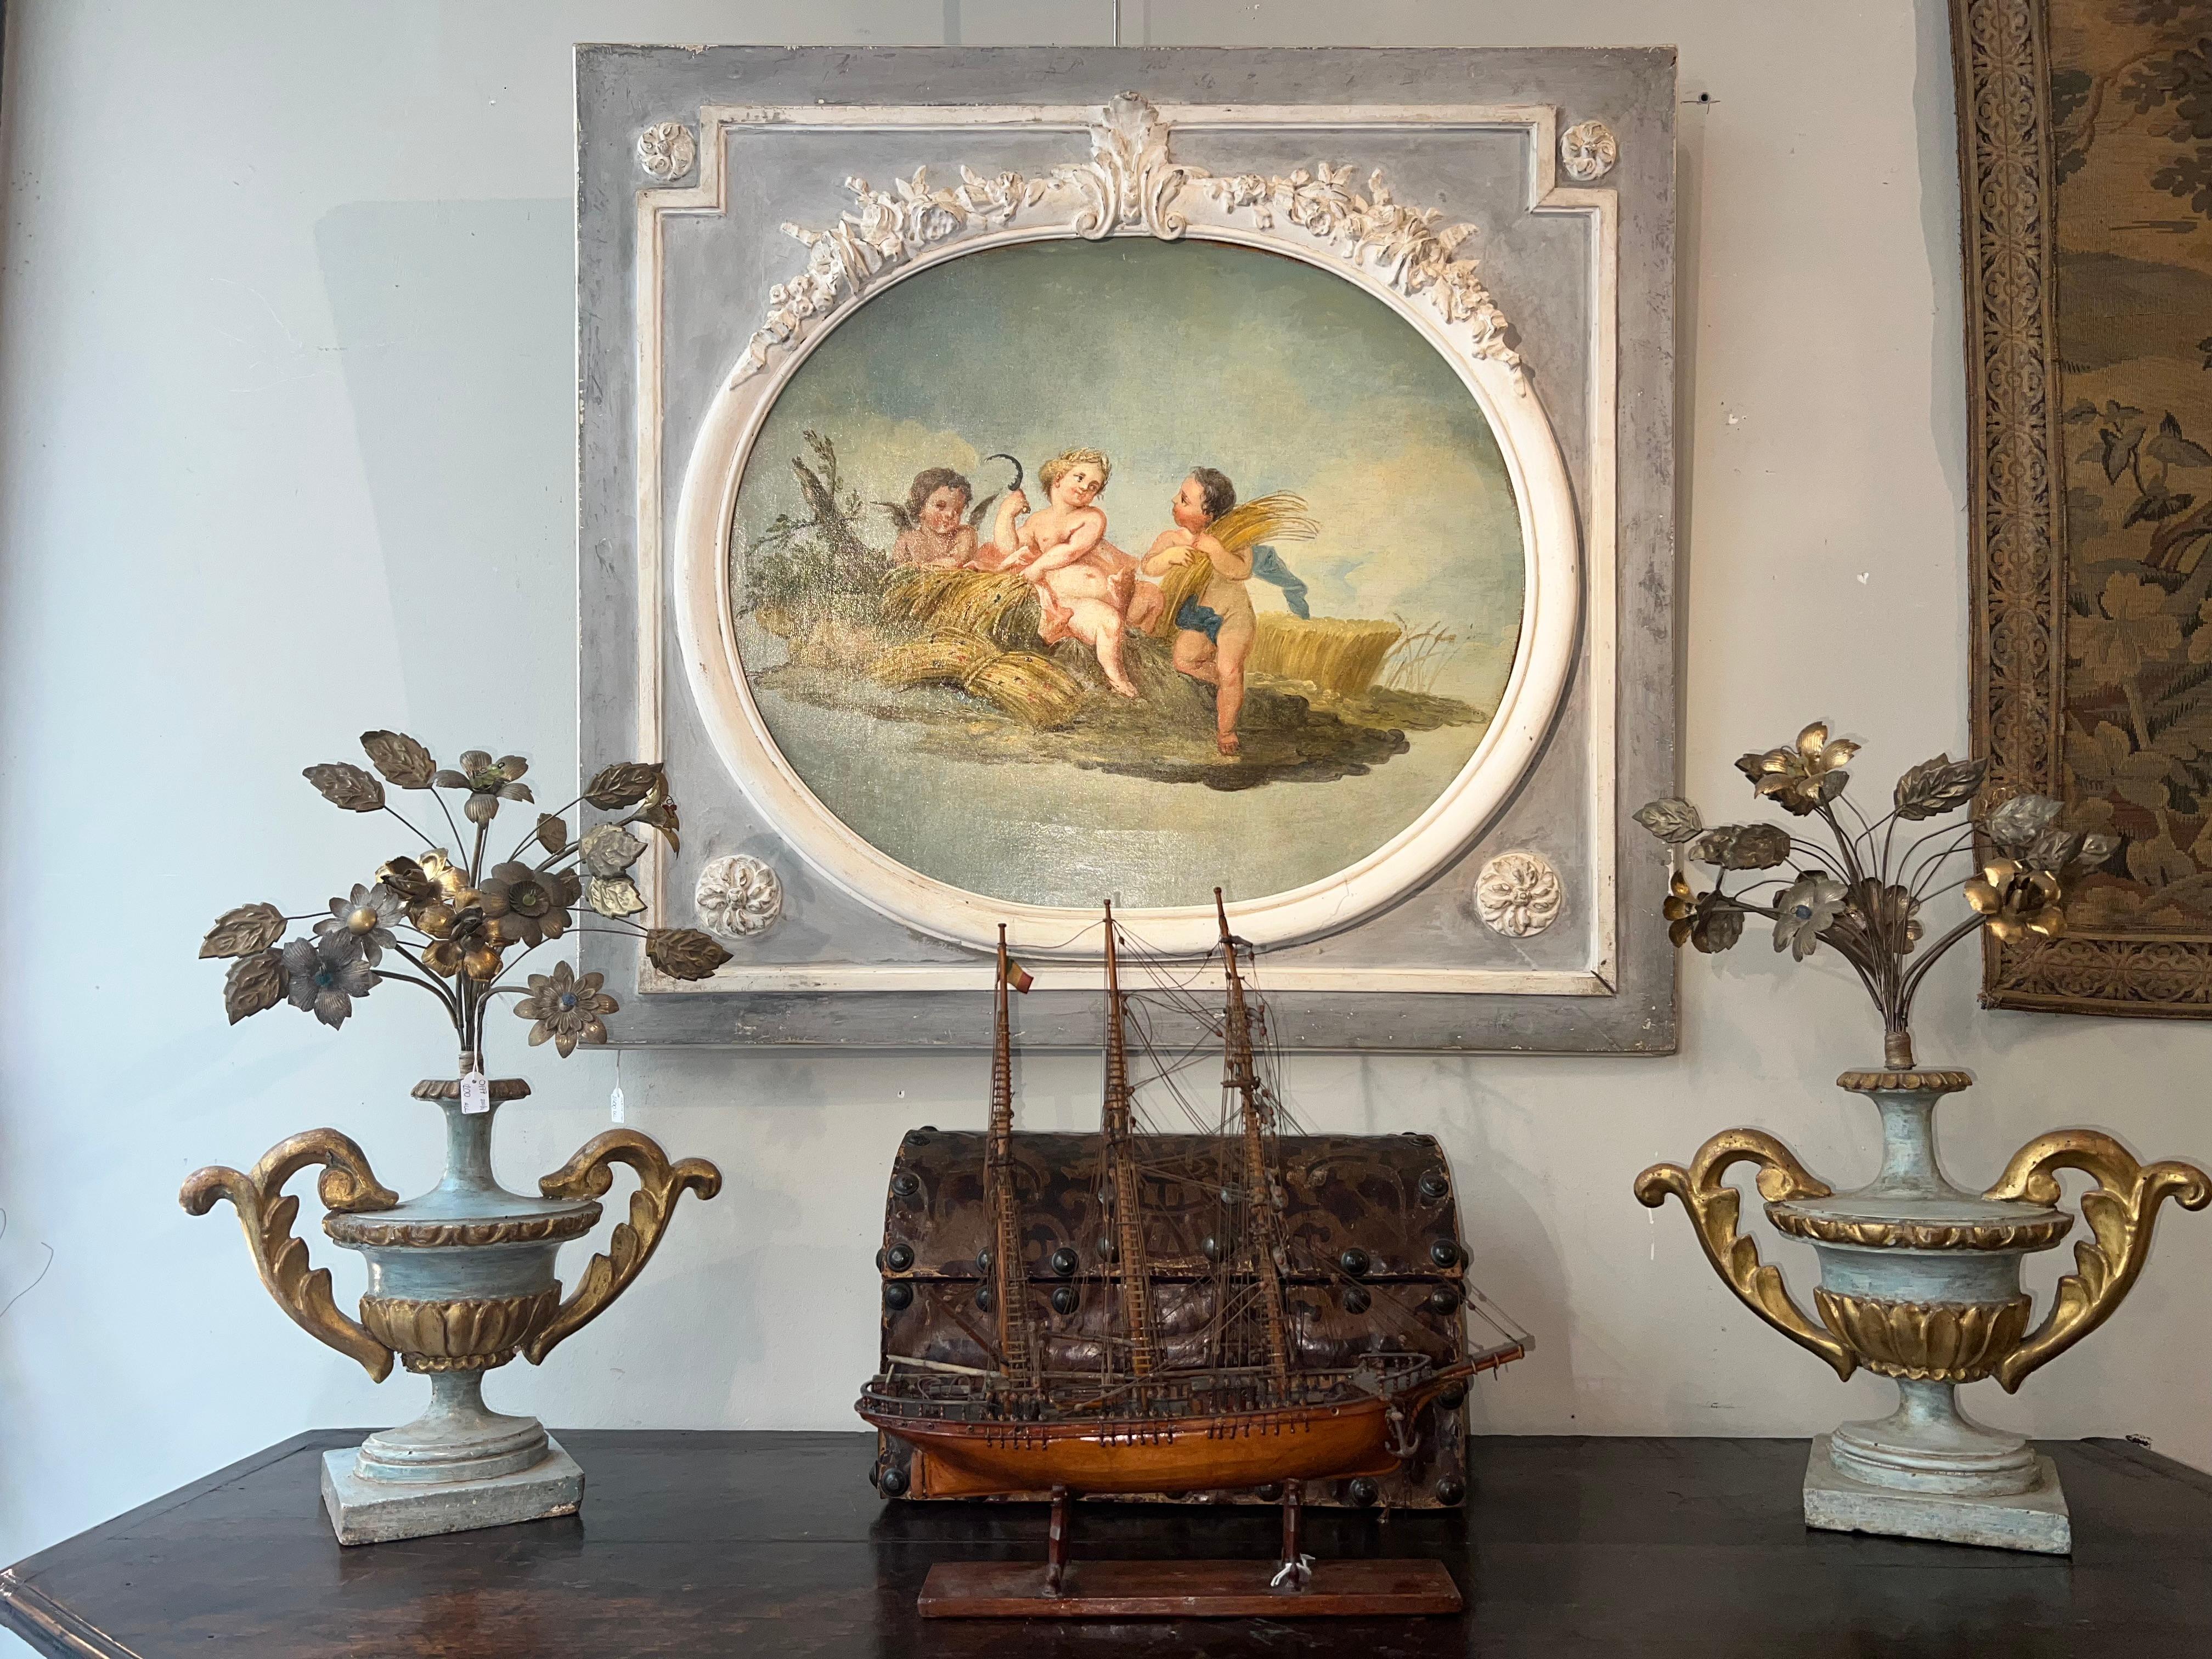 Beautiful oil painting on canvas depicting the allegory of Summer.
Piedmontese school from the end of the 1700s, within a wooden frame and tablet carved with floral and vegetable motifs, painted in shades of gray and white.

MEASUREMENTS: Overall